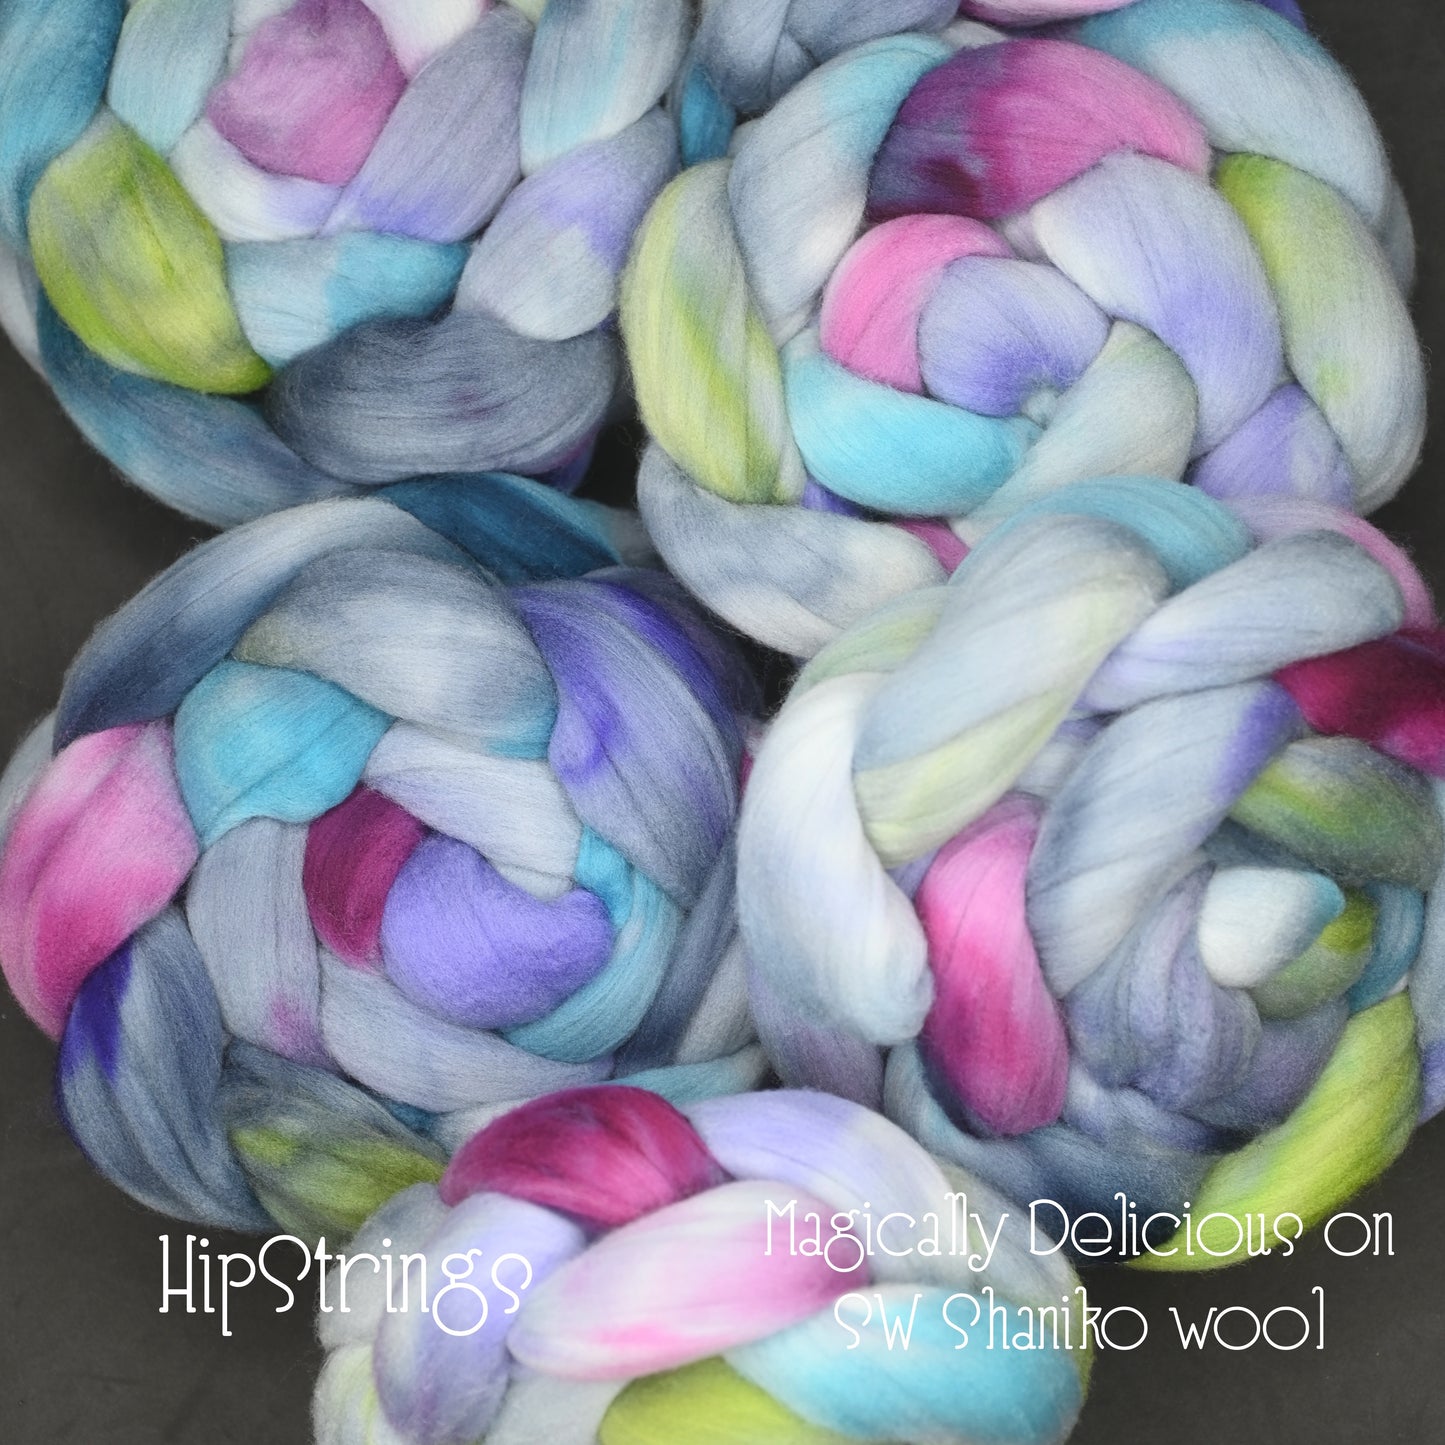 Magically Delicious on Hand Dyed SW Shaniko Wool Combed Top - 4 oz